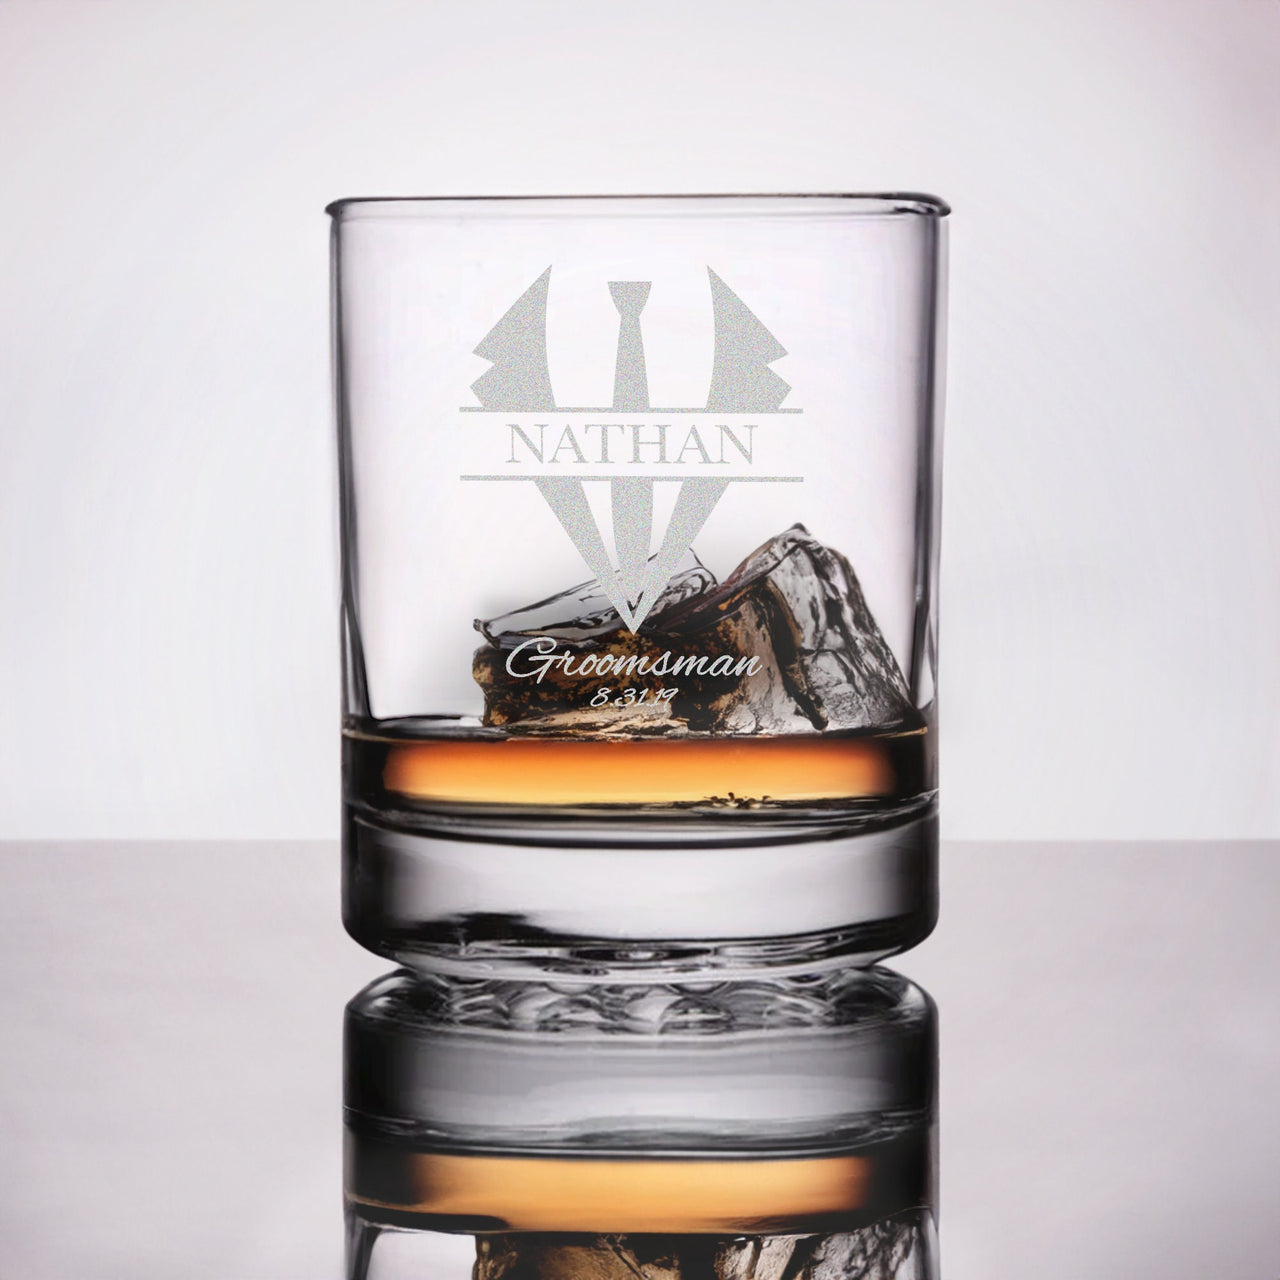 Custom Your Own Design Etched 12.25oz Whiskey Glasses, Personalized Design Rocks Glass Perfect for Home Bar ware, Mancave Gift Decor Glass